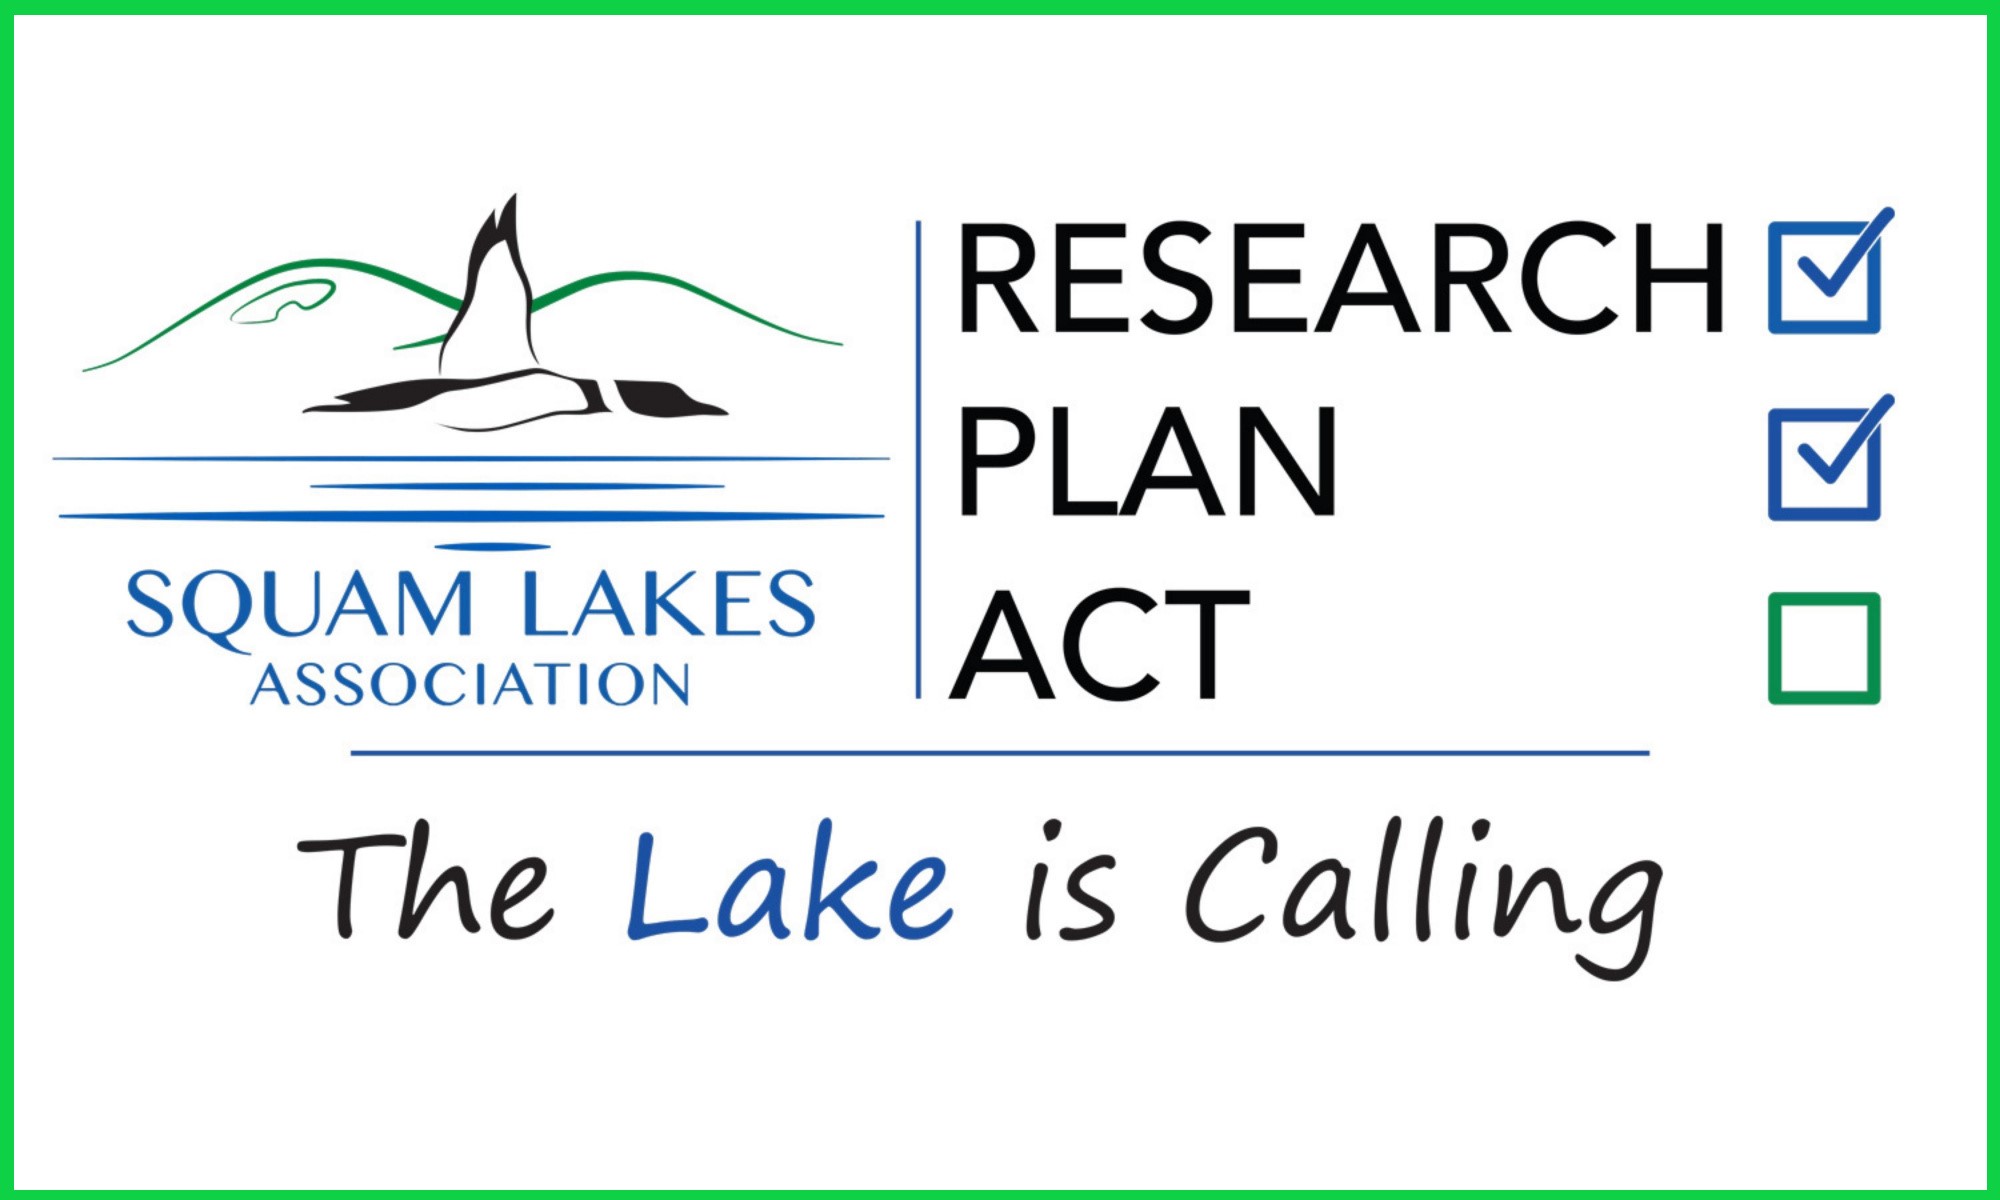  
Support the Squam Lakes Association's initiative to ensure a healthy Squam into the future.
 